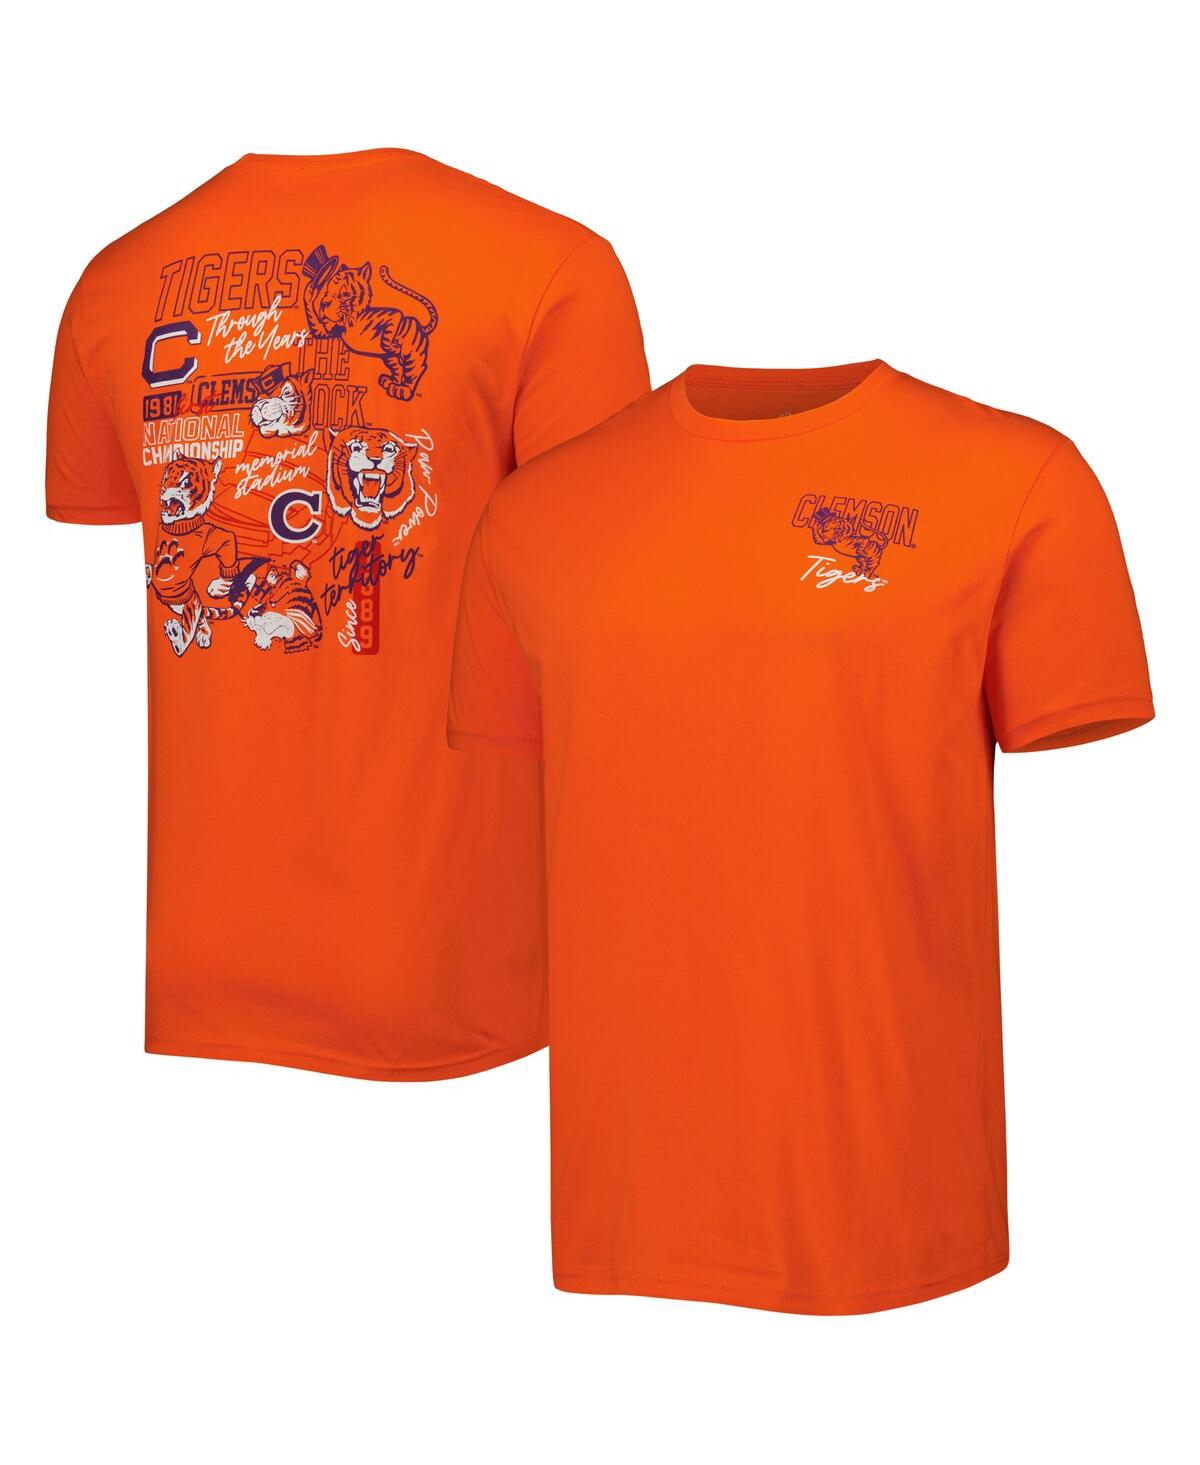 Shop Image One Men's Orange Clemson Tigers Vintage-like Through The Years Two-hit T-shirt